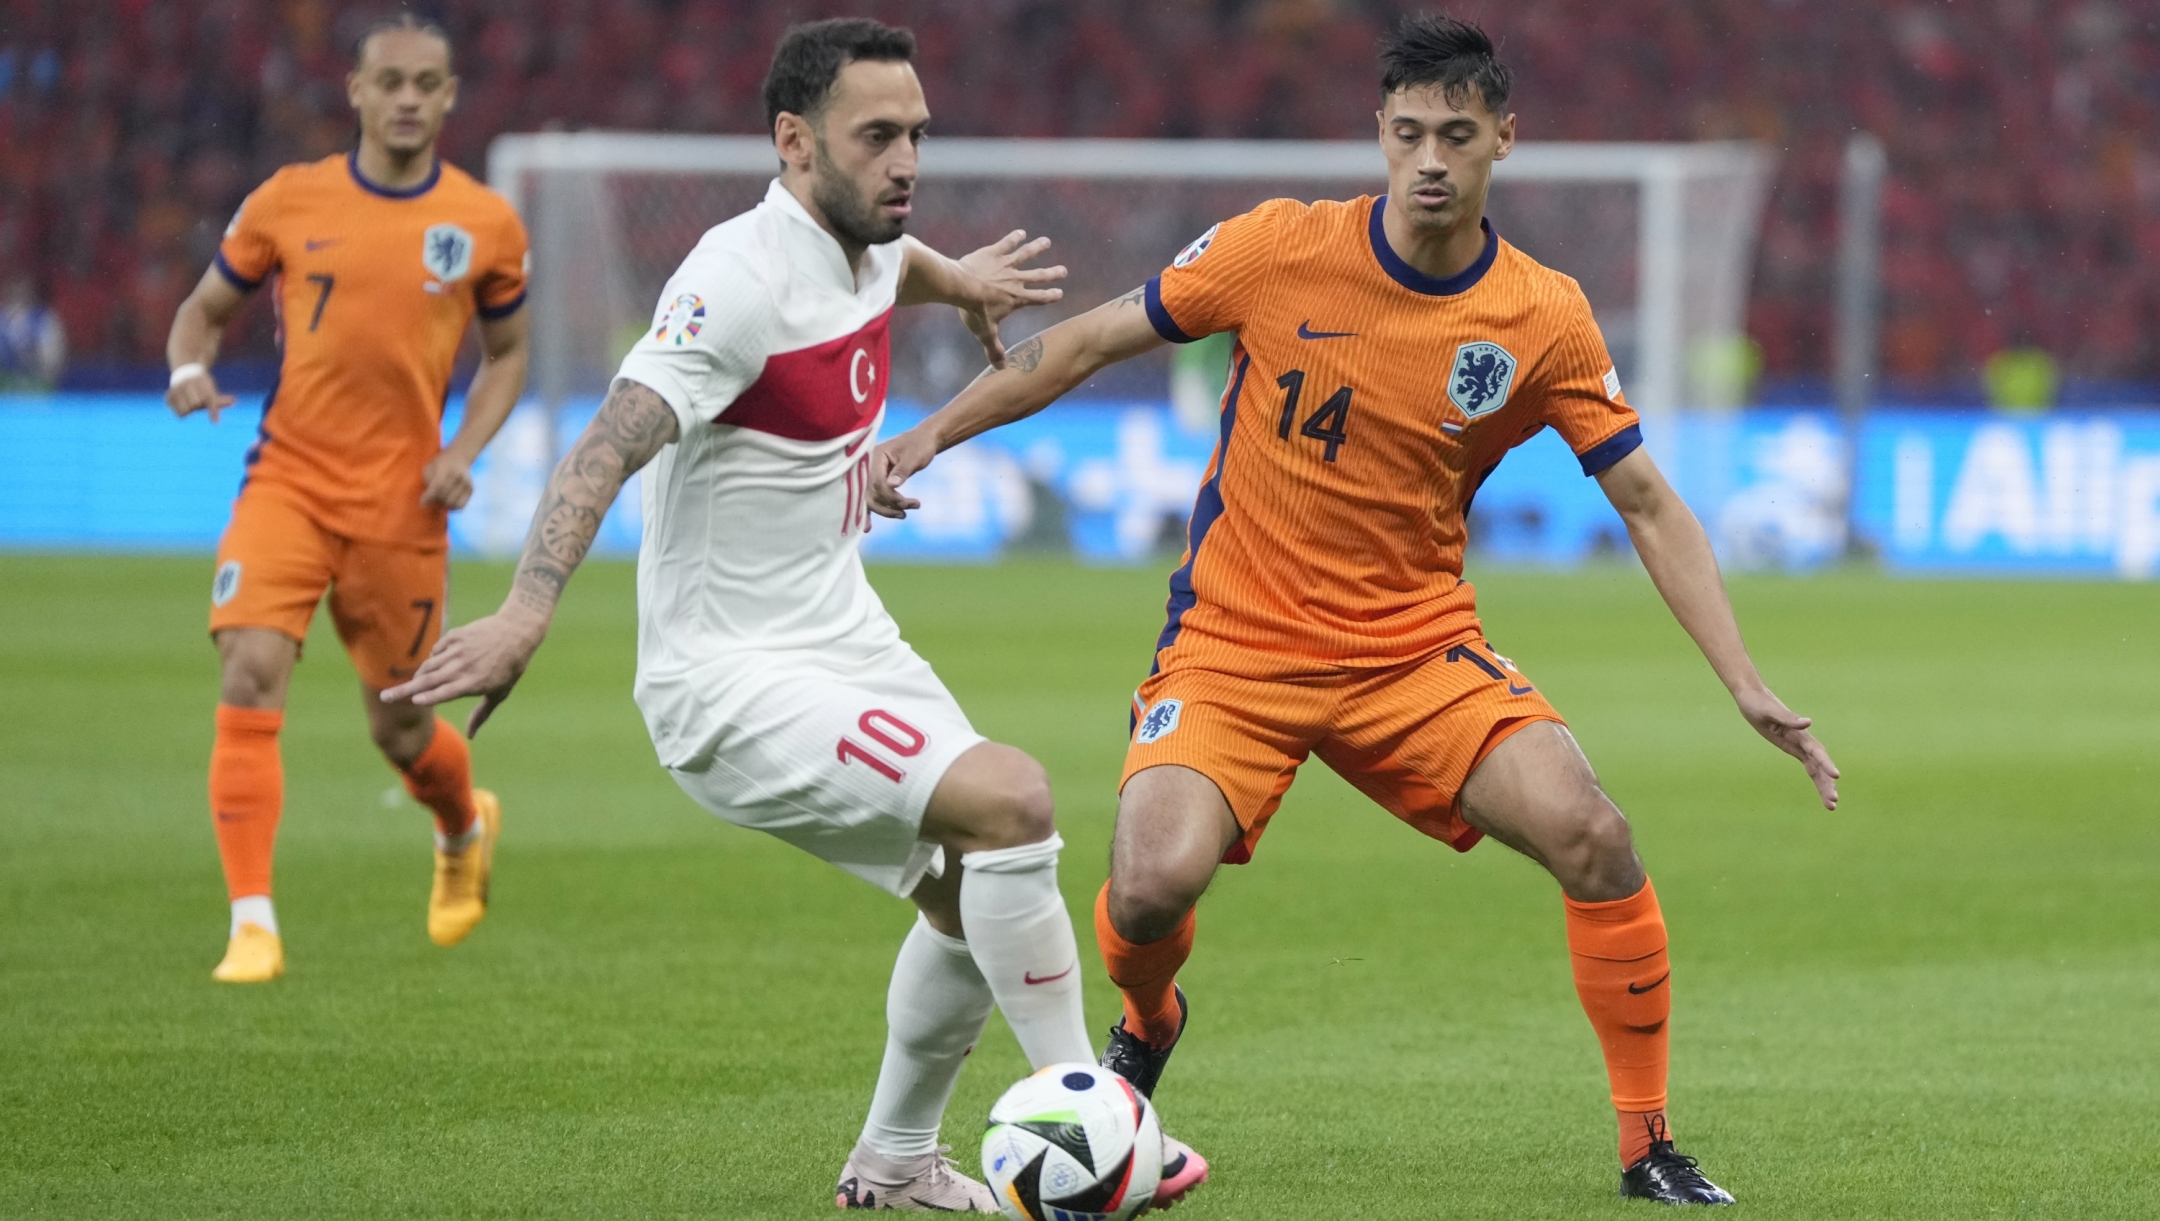 Tijjani Reijnders of the Netherlands, right, vies for the ball with Turkey's Hakan Calhanoglu during the quarterfinal match between the Netherlands and Turkey at the Euro 2024 soccer tournament in Berlin, Germany, Saturday, July 6, 2024. (AP Photo/Matthias Schrader)